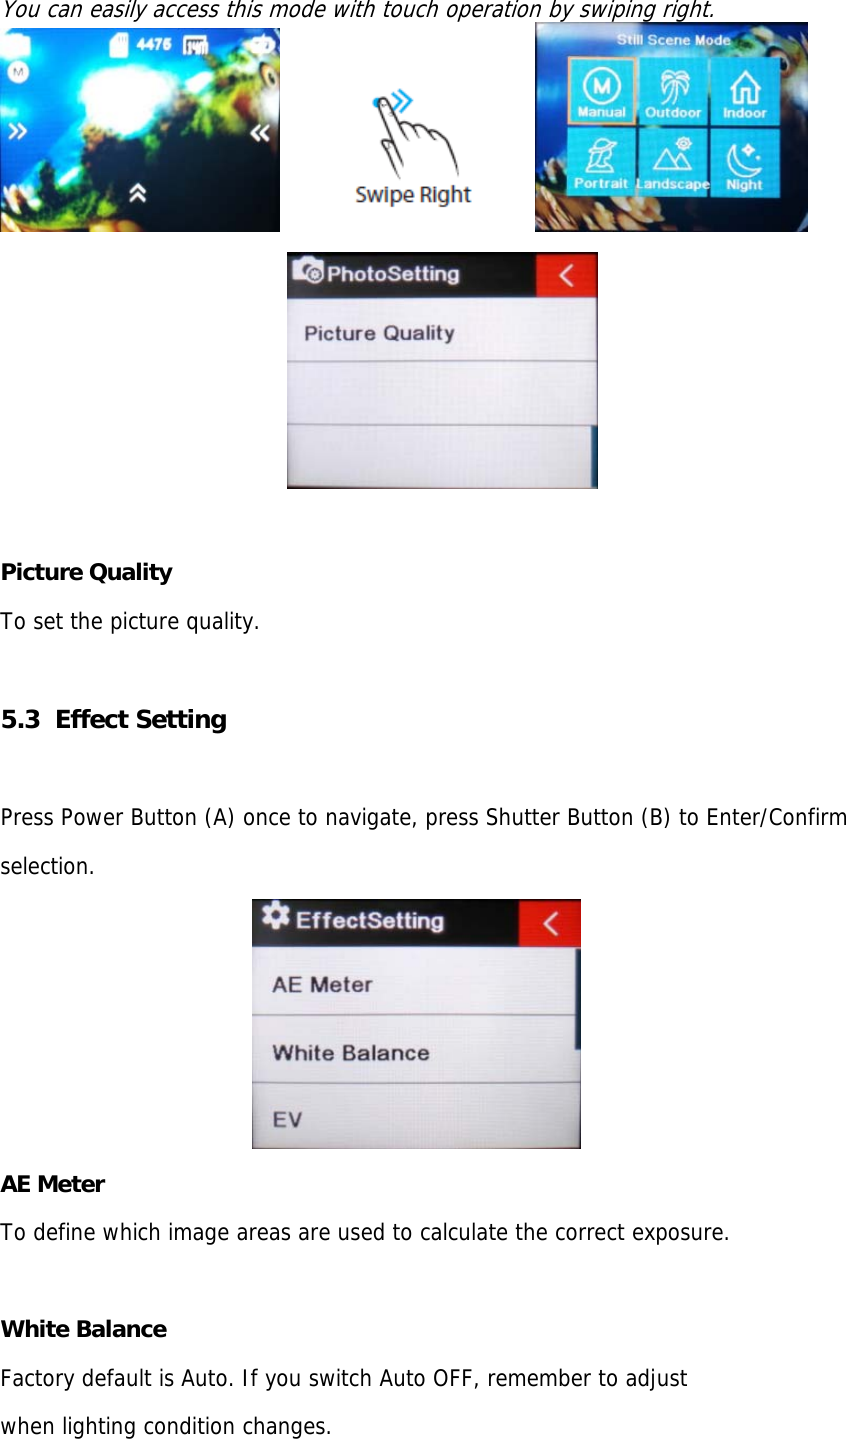 You can easily access this mode with touch operation by swiping right.                                                                  Picture Quality To set the picture quality.  5.3  Effect Setting  Press Power Button (A) once to navigate, press Shutter Button (B) to Enter/Confirm  selection.  AE Meter To define which image areas are used to calculate the correct exposure.  White Balance Factory default is Auto. If you switch Auto OFF, remember to adjust  when lighting condition changes. 